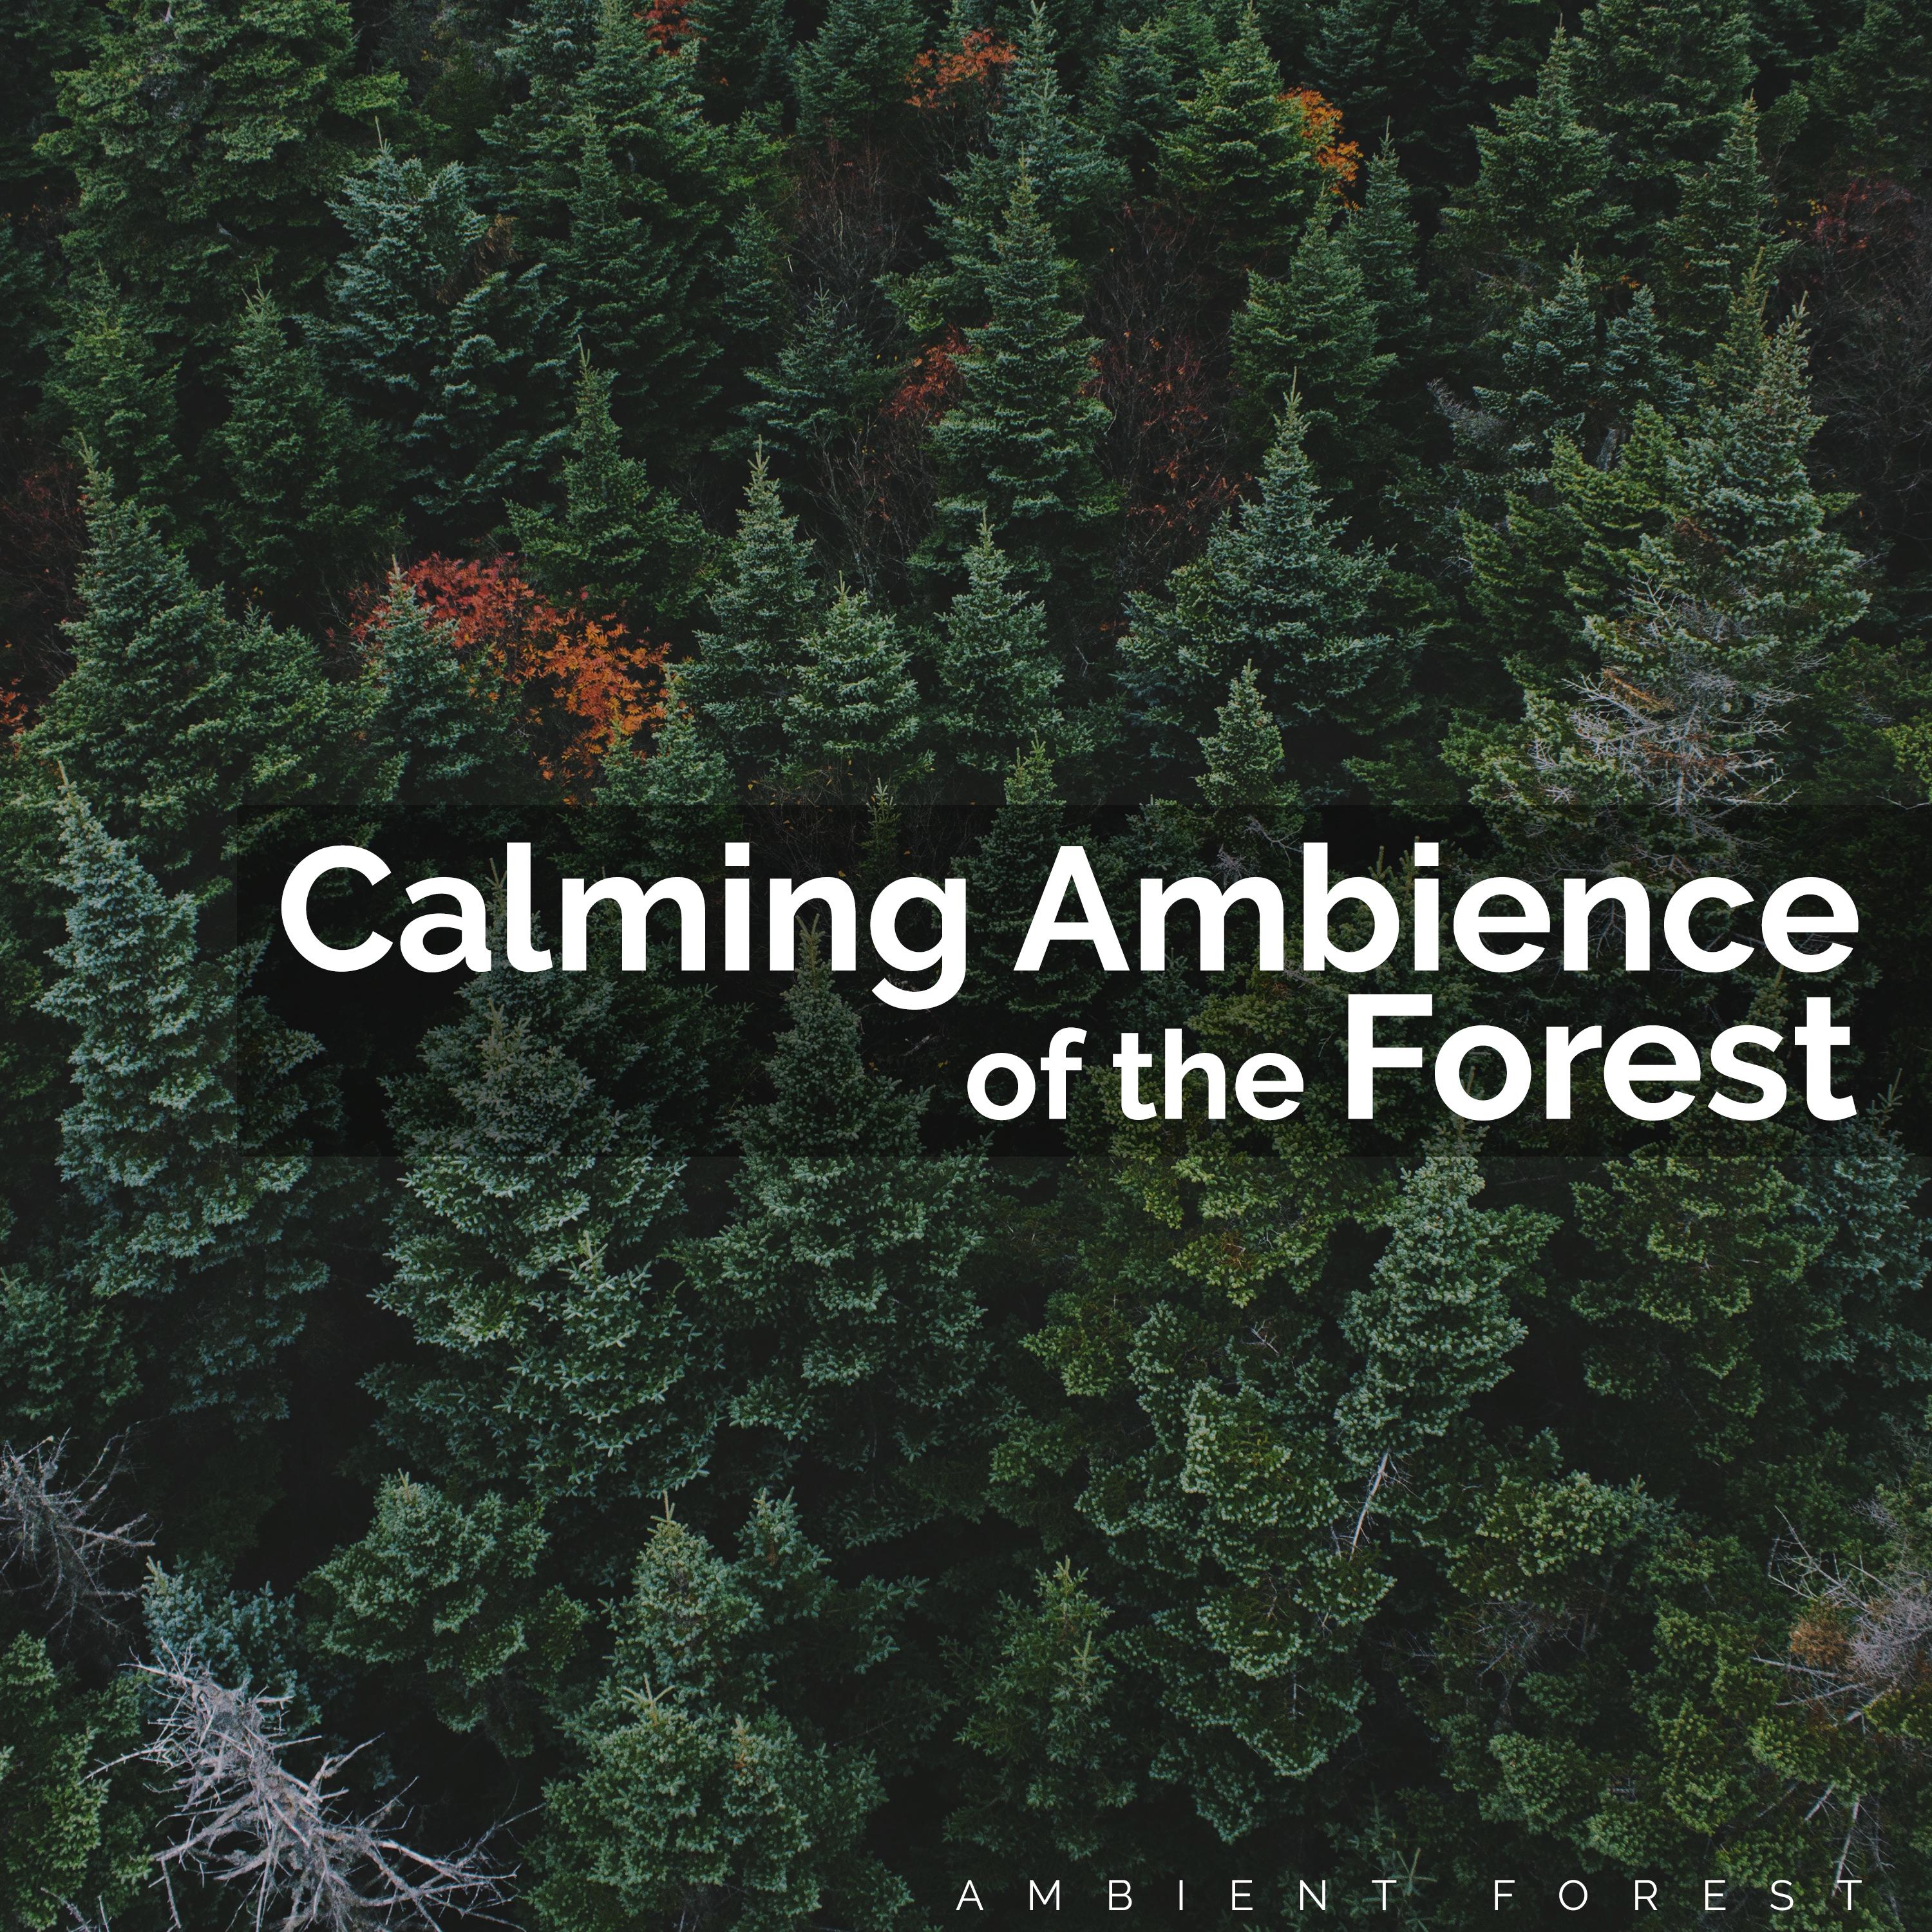 Calming Ambience of the Forest